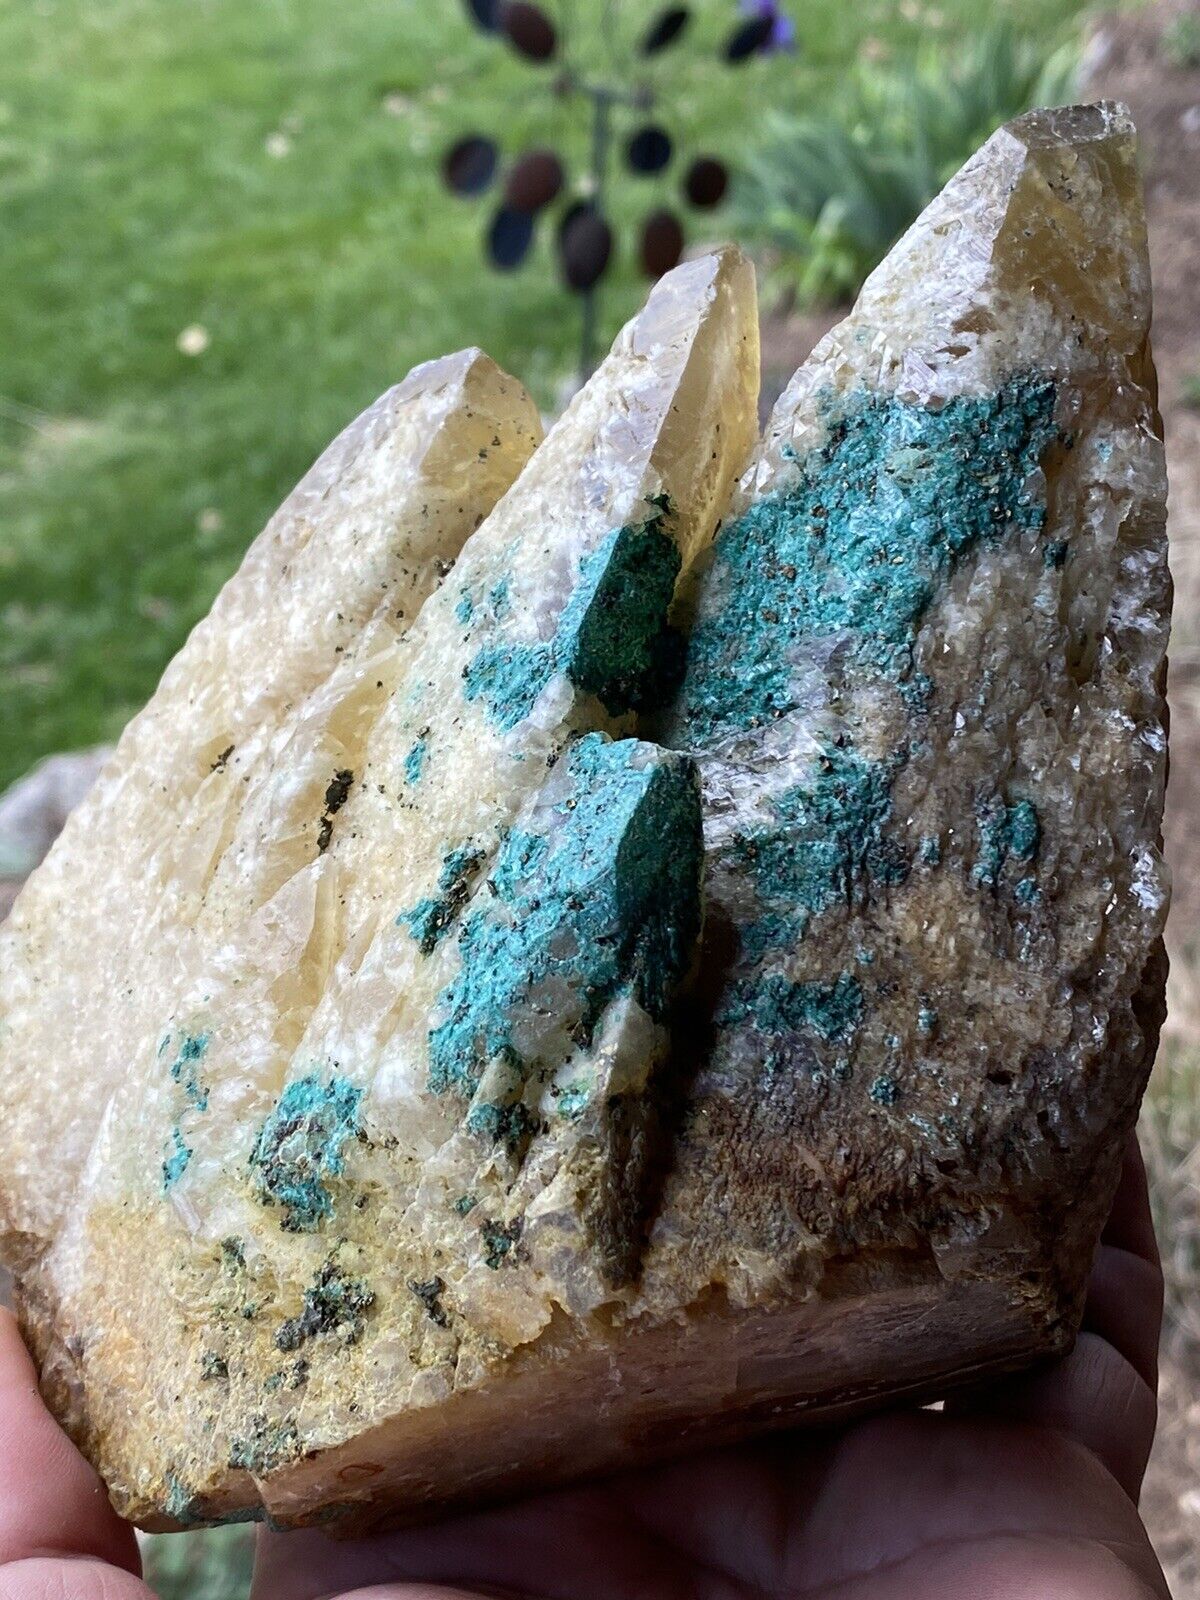 Malachite and Pyrite on Clacite. Large display from Buick Mine Vinurnum Trend